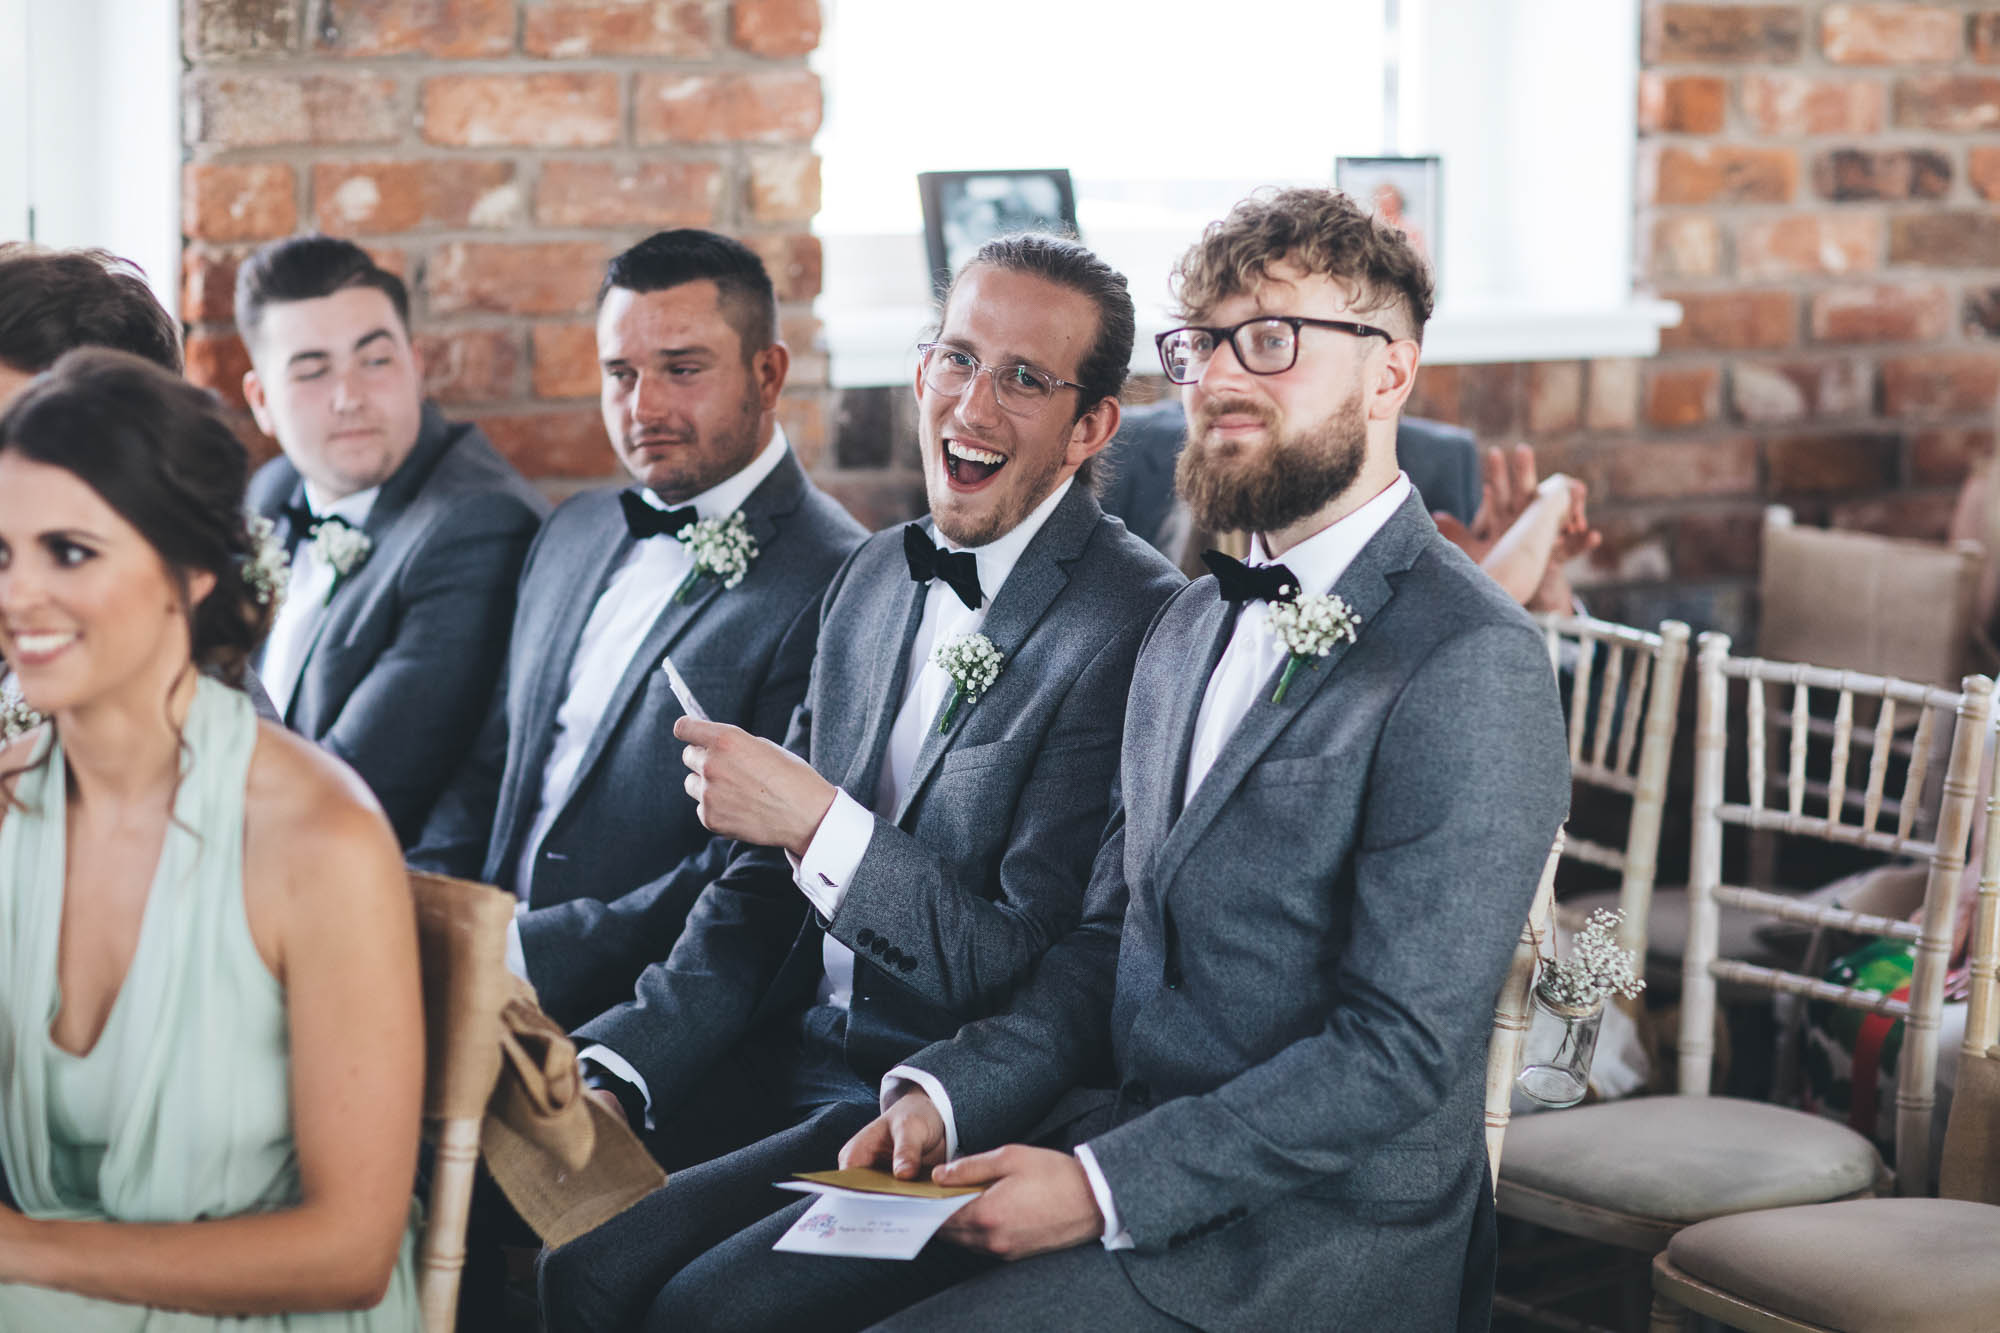 Groomsmen laugh and joke during the ceremony